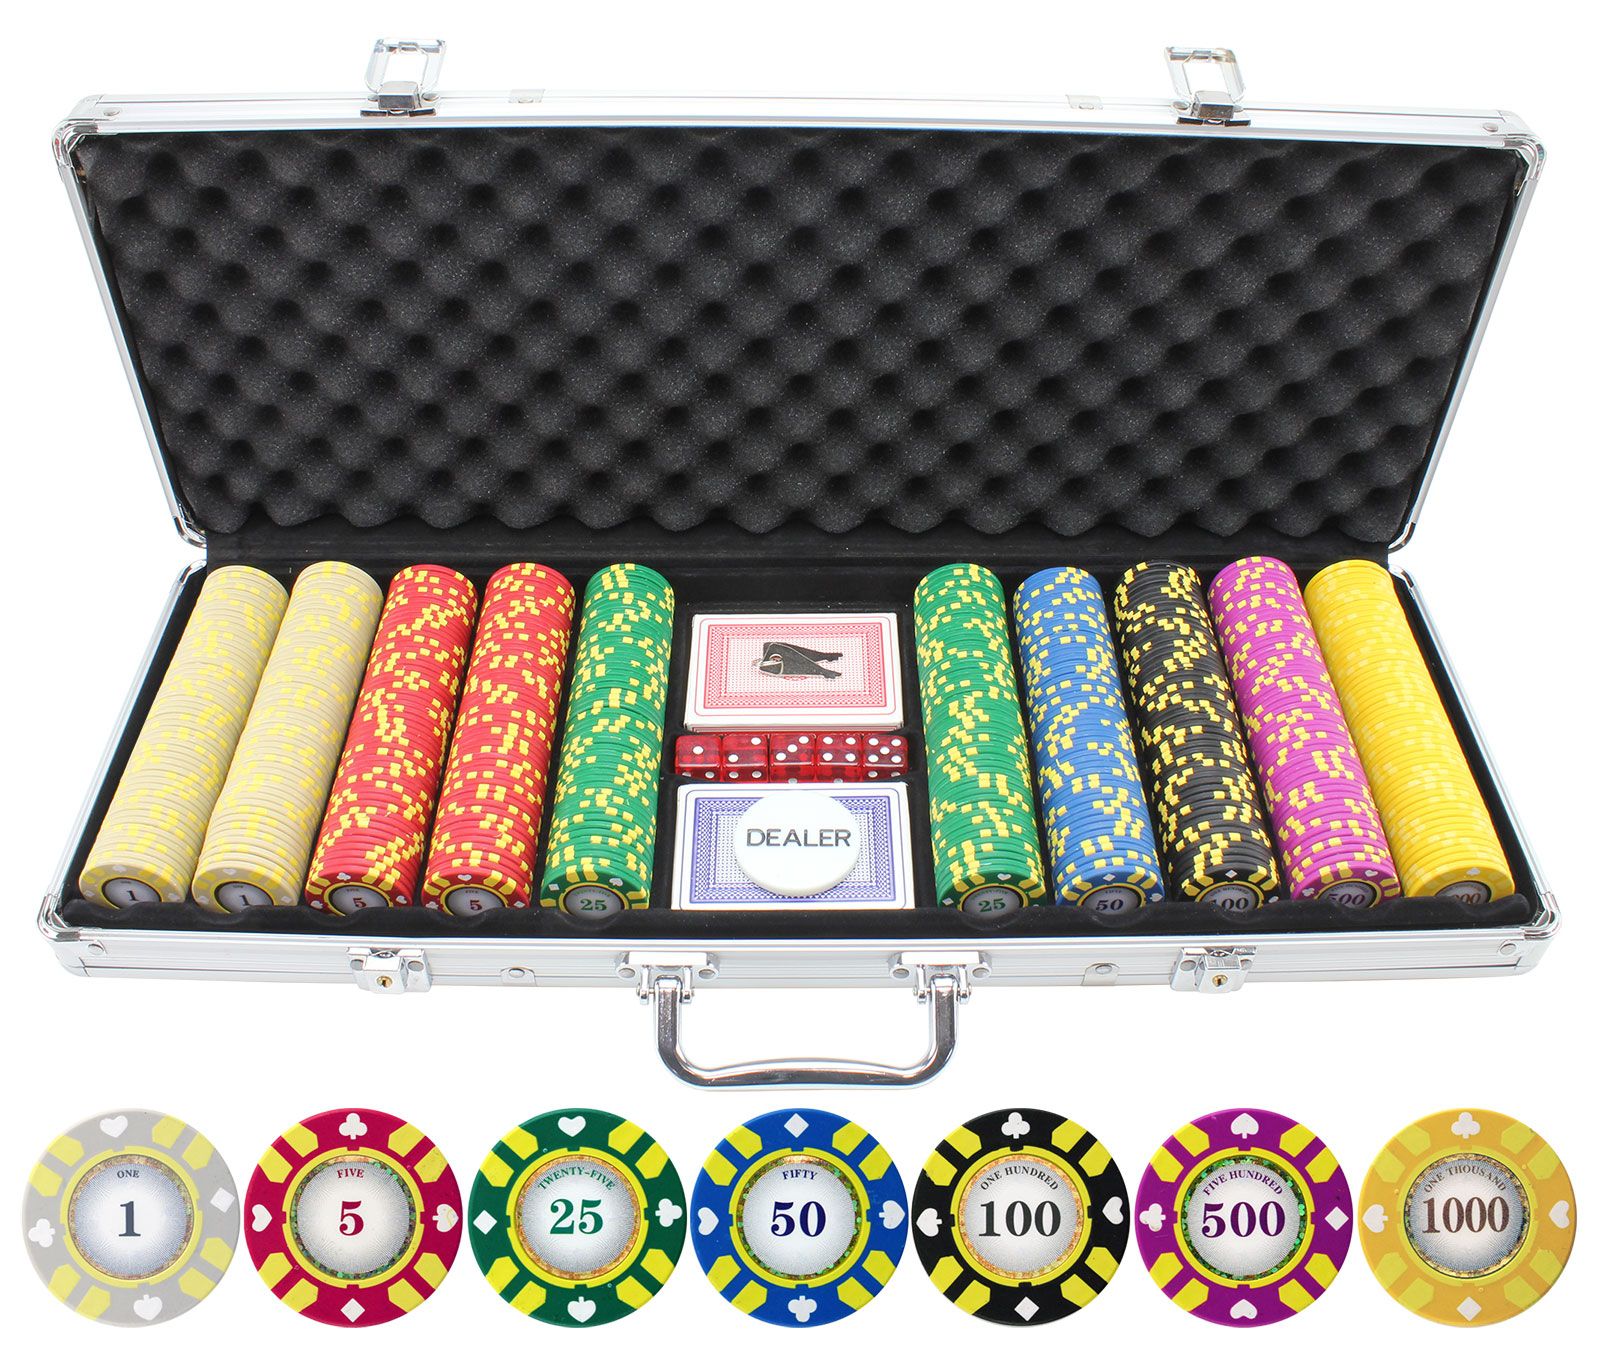 Get 1 Free Buy 2 100 Yellow Striped Dice 11.5g Clay Poker Chips New 